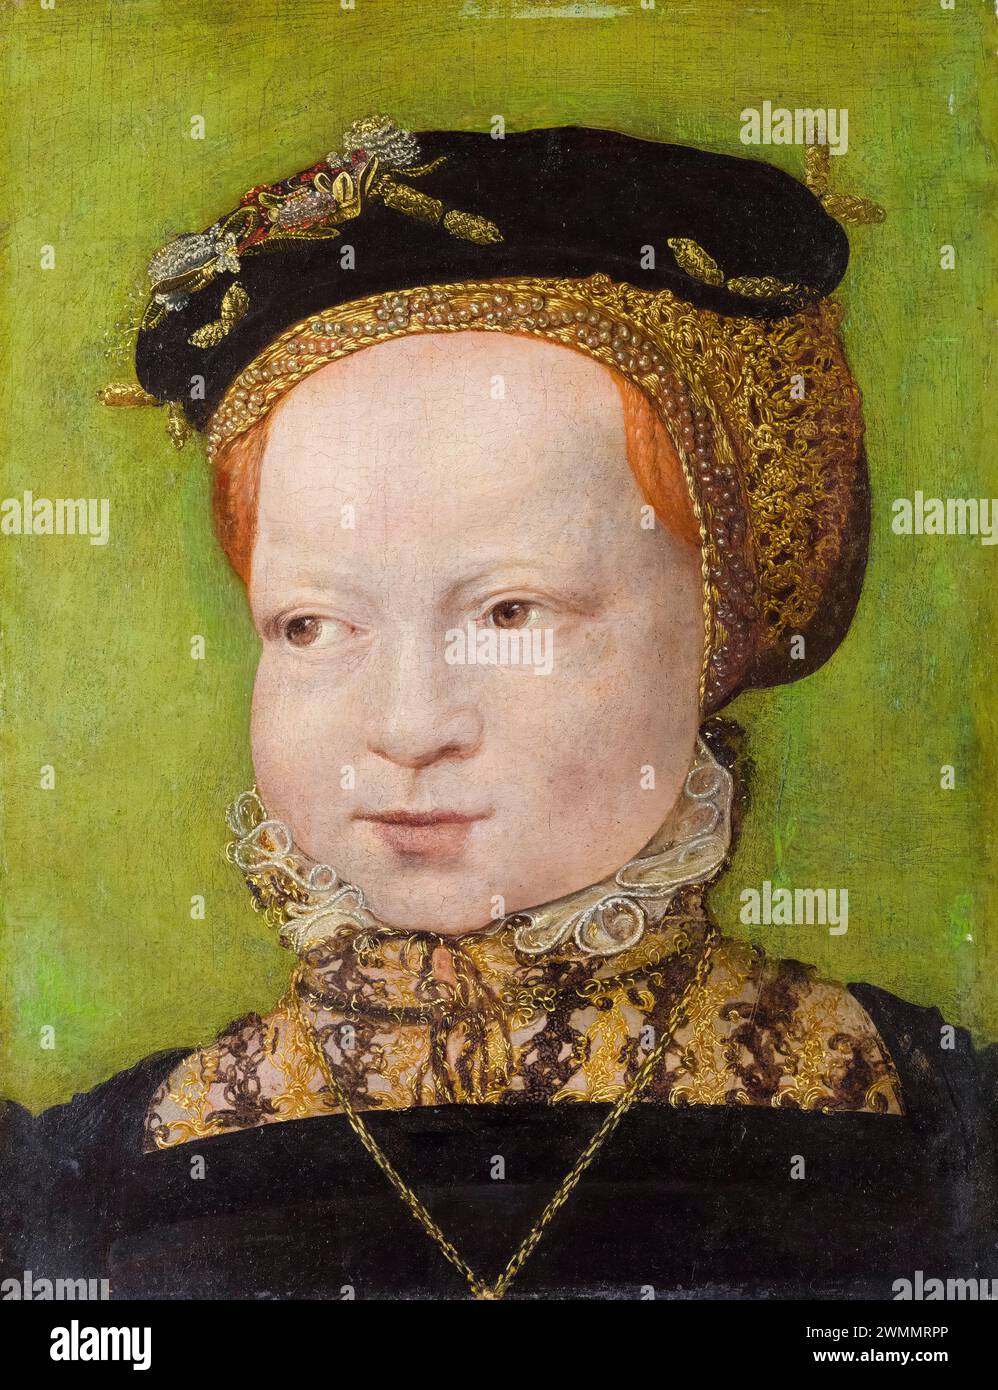 Jakob Seisenegger, Portrait of a Girl, painting in oil on wood, 1545-1550 Stock Photo